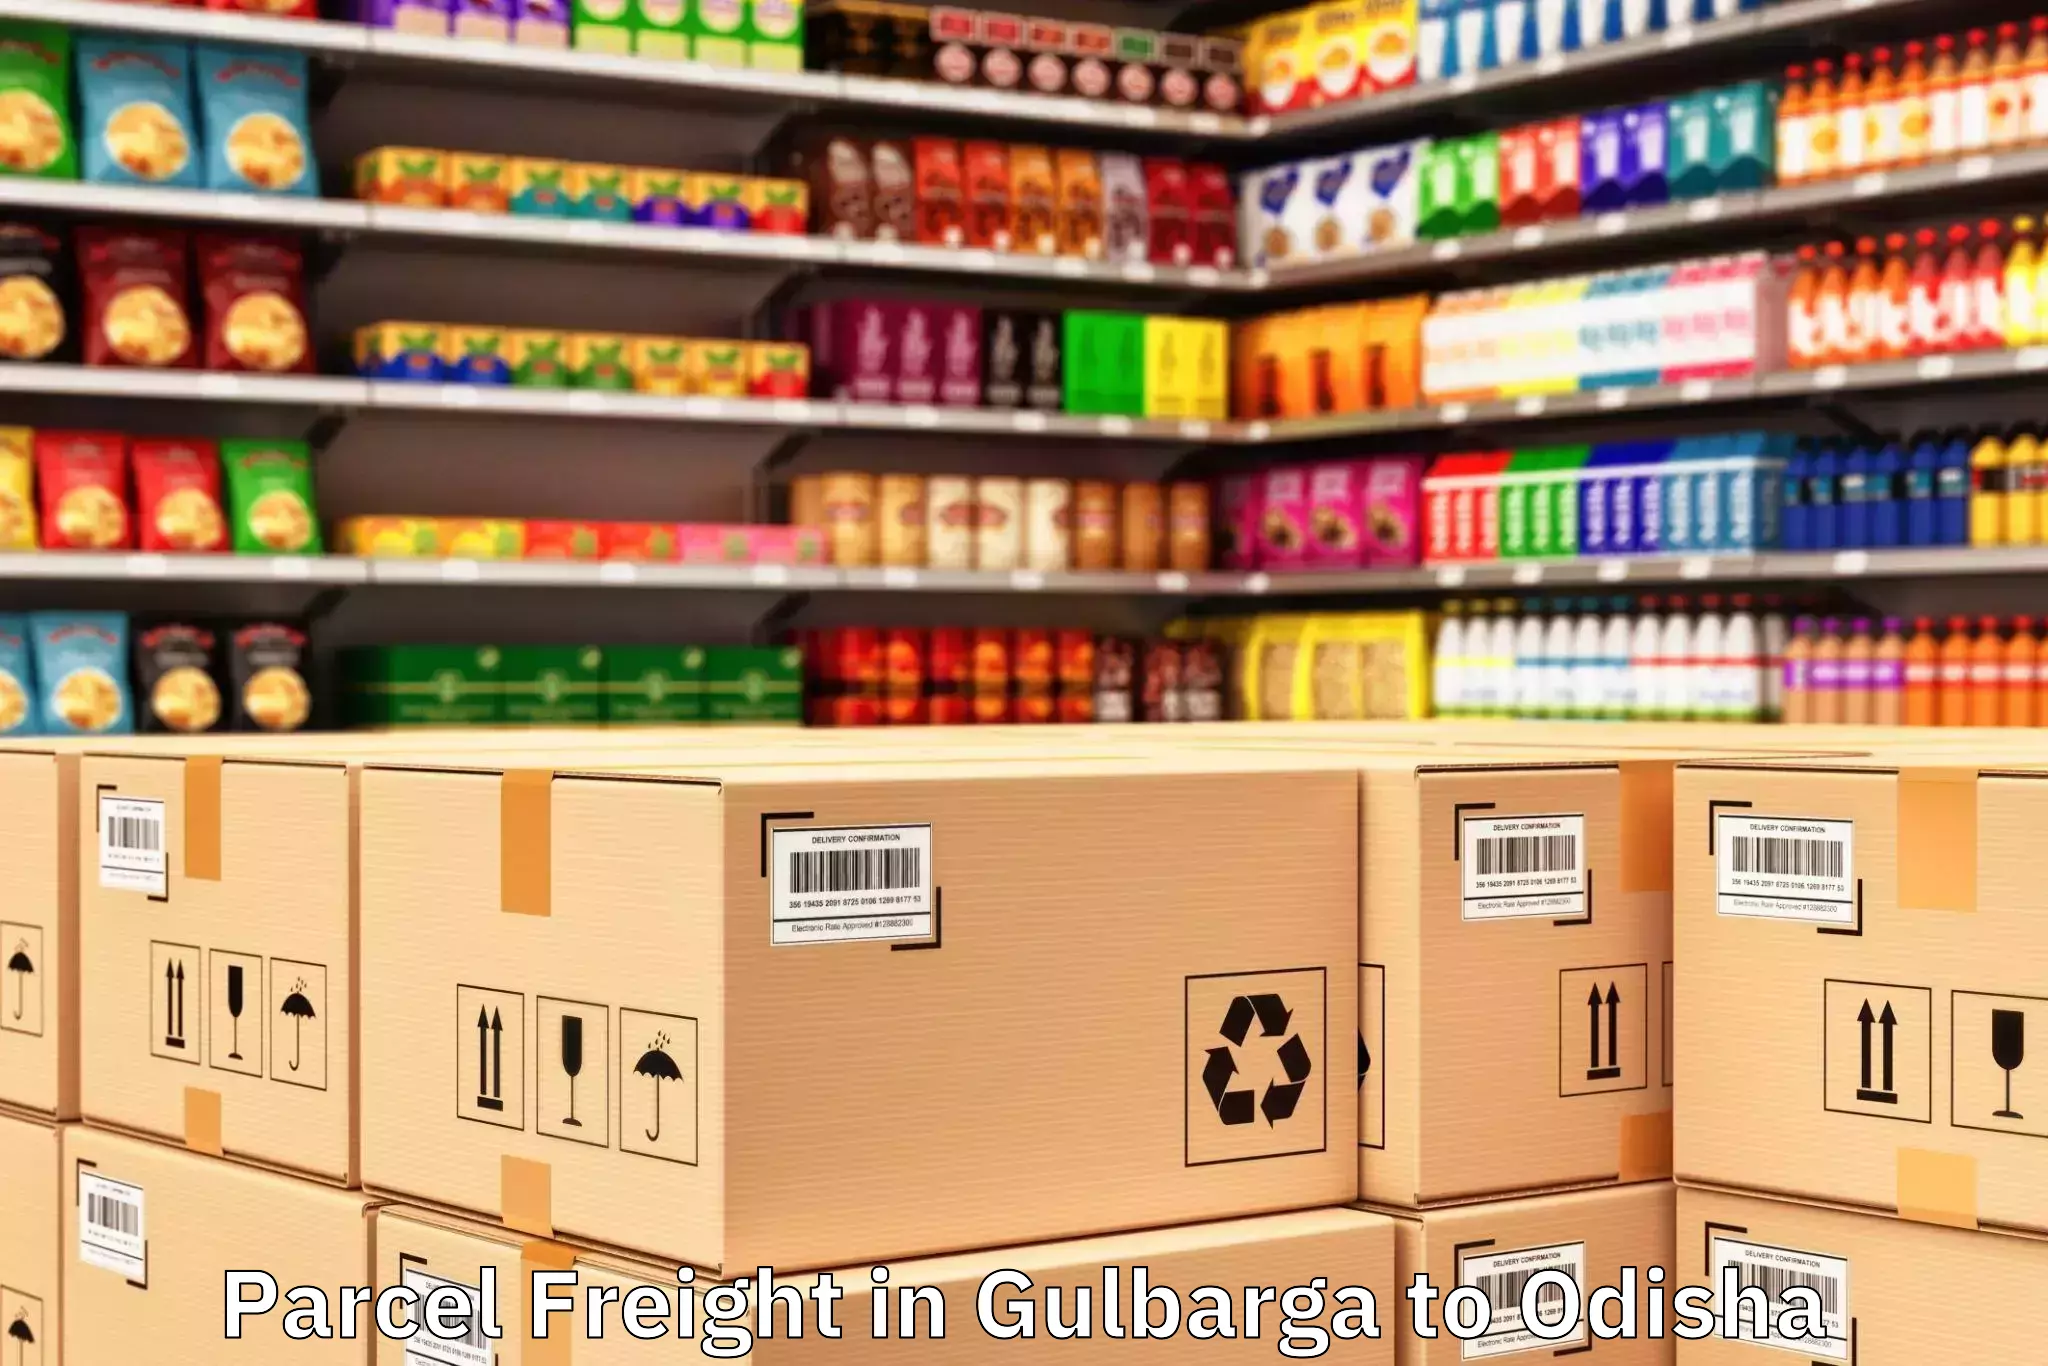 Discover Gulbarga to Chandabali Parcel Freight